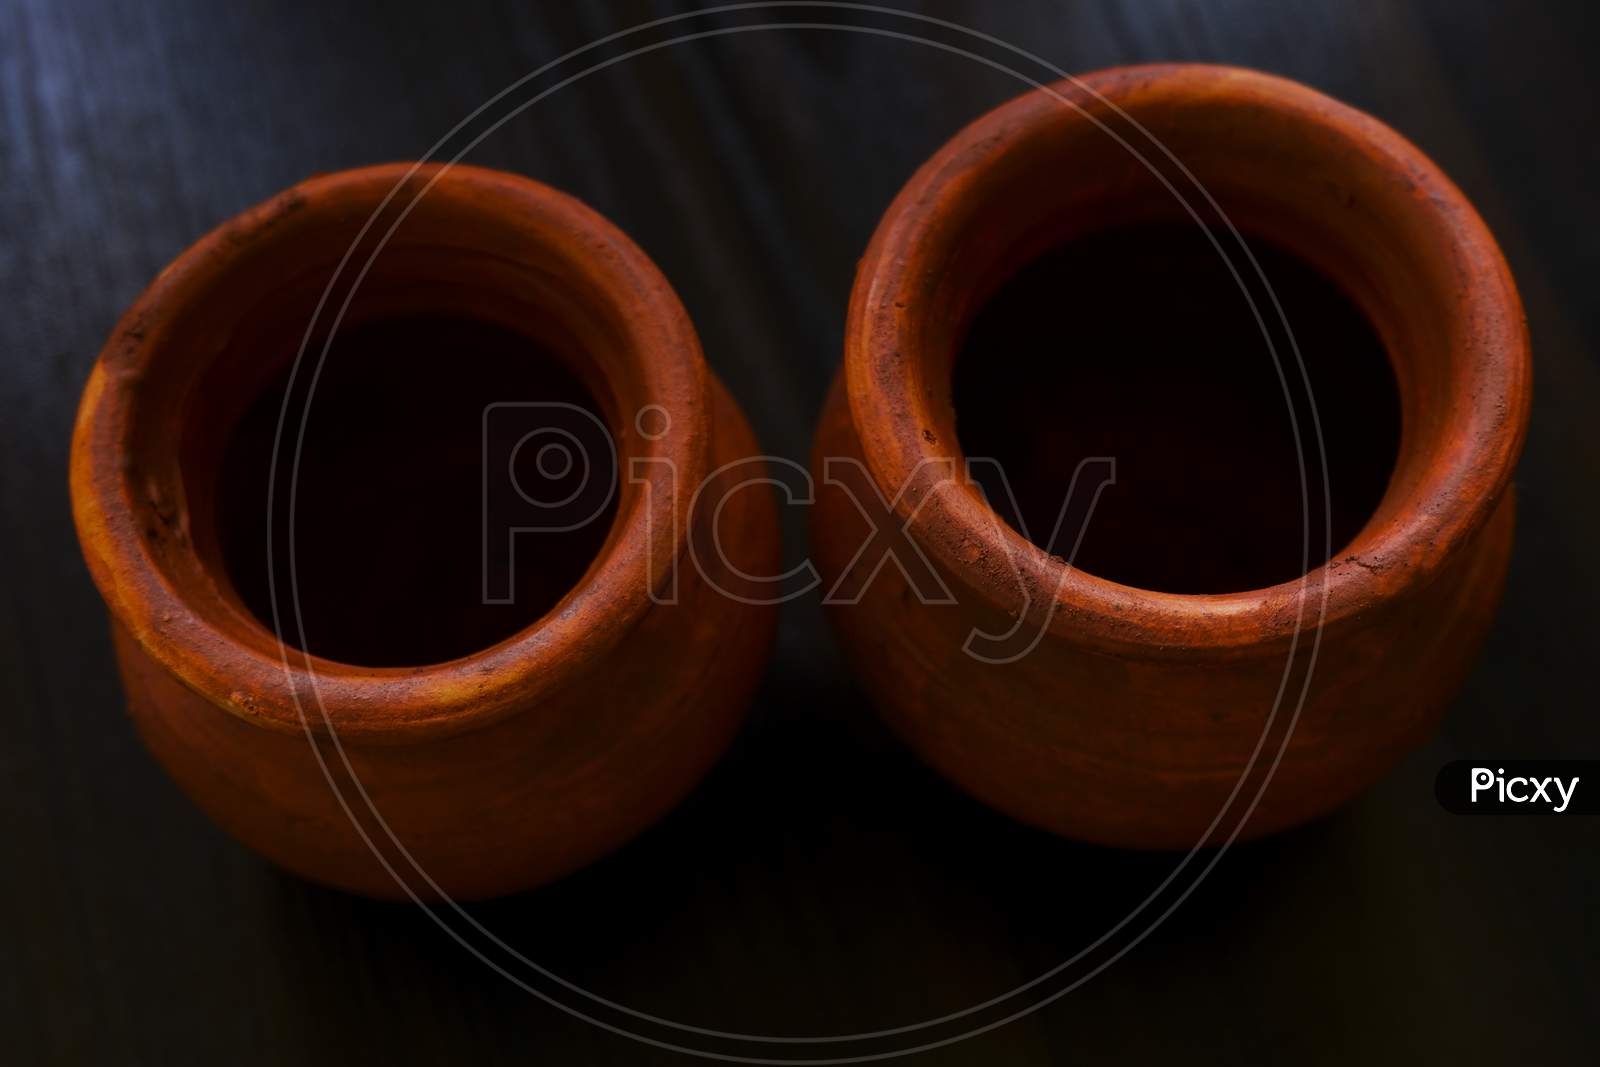 Top Shot Of Handmade Small Clay Pots Isolated On Wooden Table